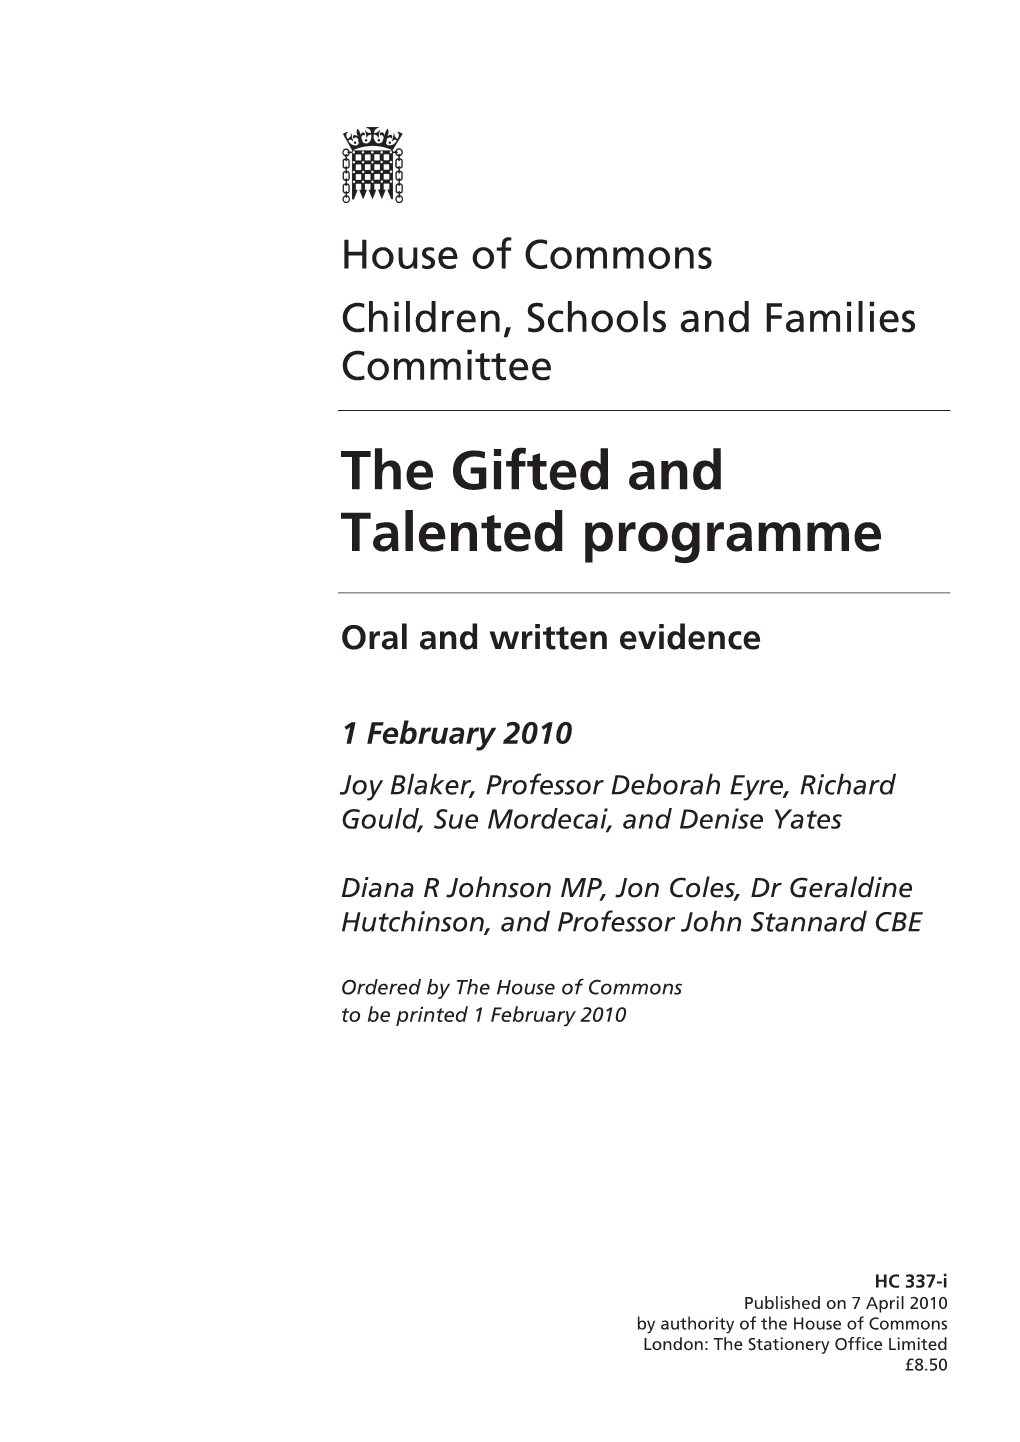 The Gifted and Talented Programme